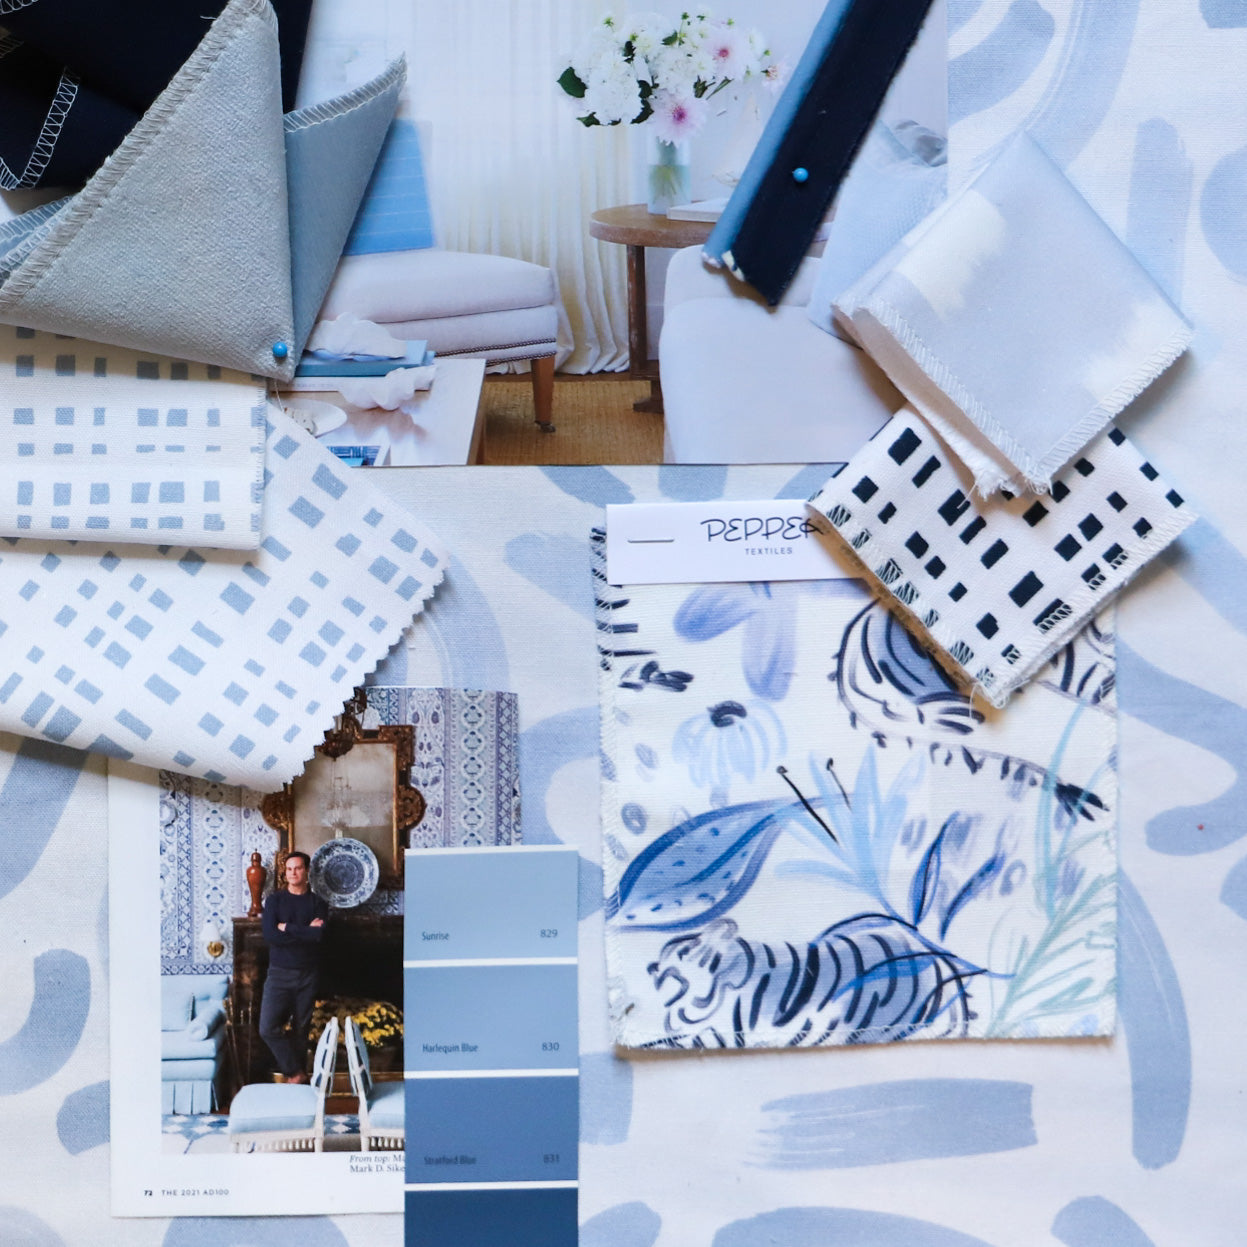 Interior design moodboard and fabric inspirations with Sky Blue Pattern Printed swatch, Blue With Intricate Tiger Design Printed Swatch, Sky Blue Gingham Printed Swatch, Black Gingham Printed Swatch, and Sky Blue Gingham Printed Swatch